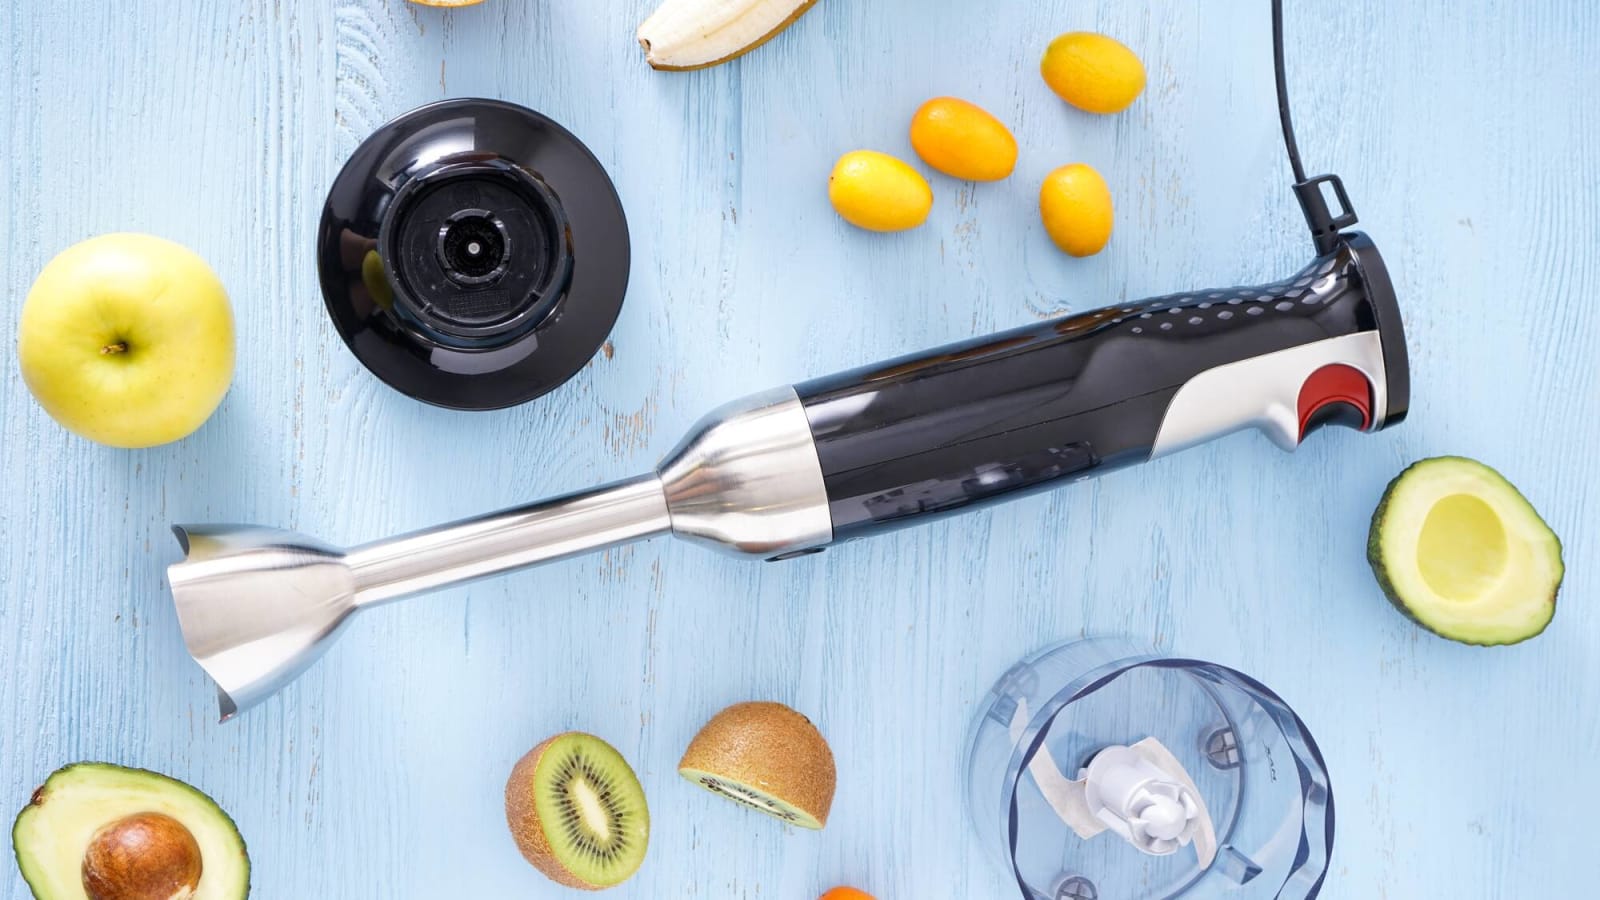 Go for a spin: 23 recipes that call for an immersion blender